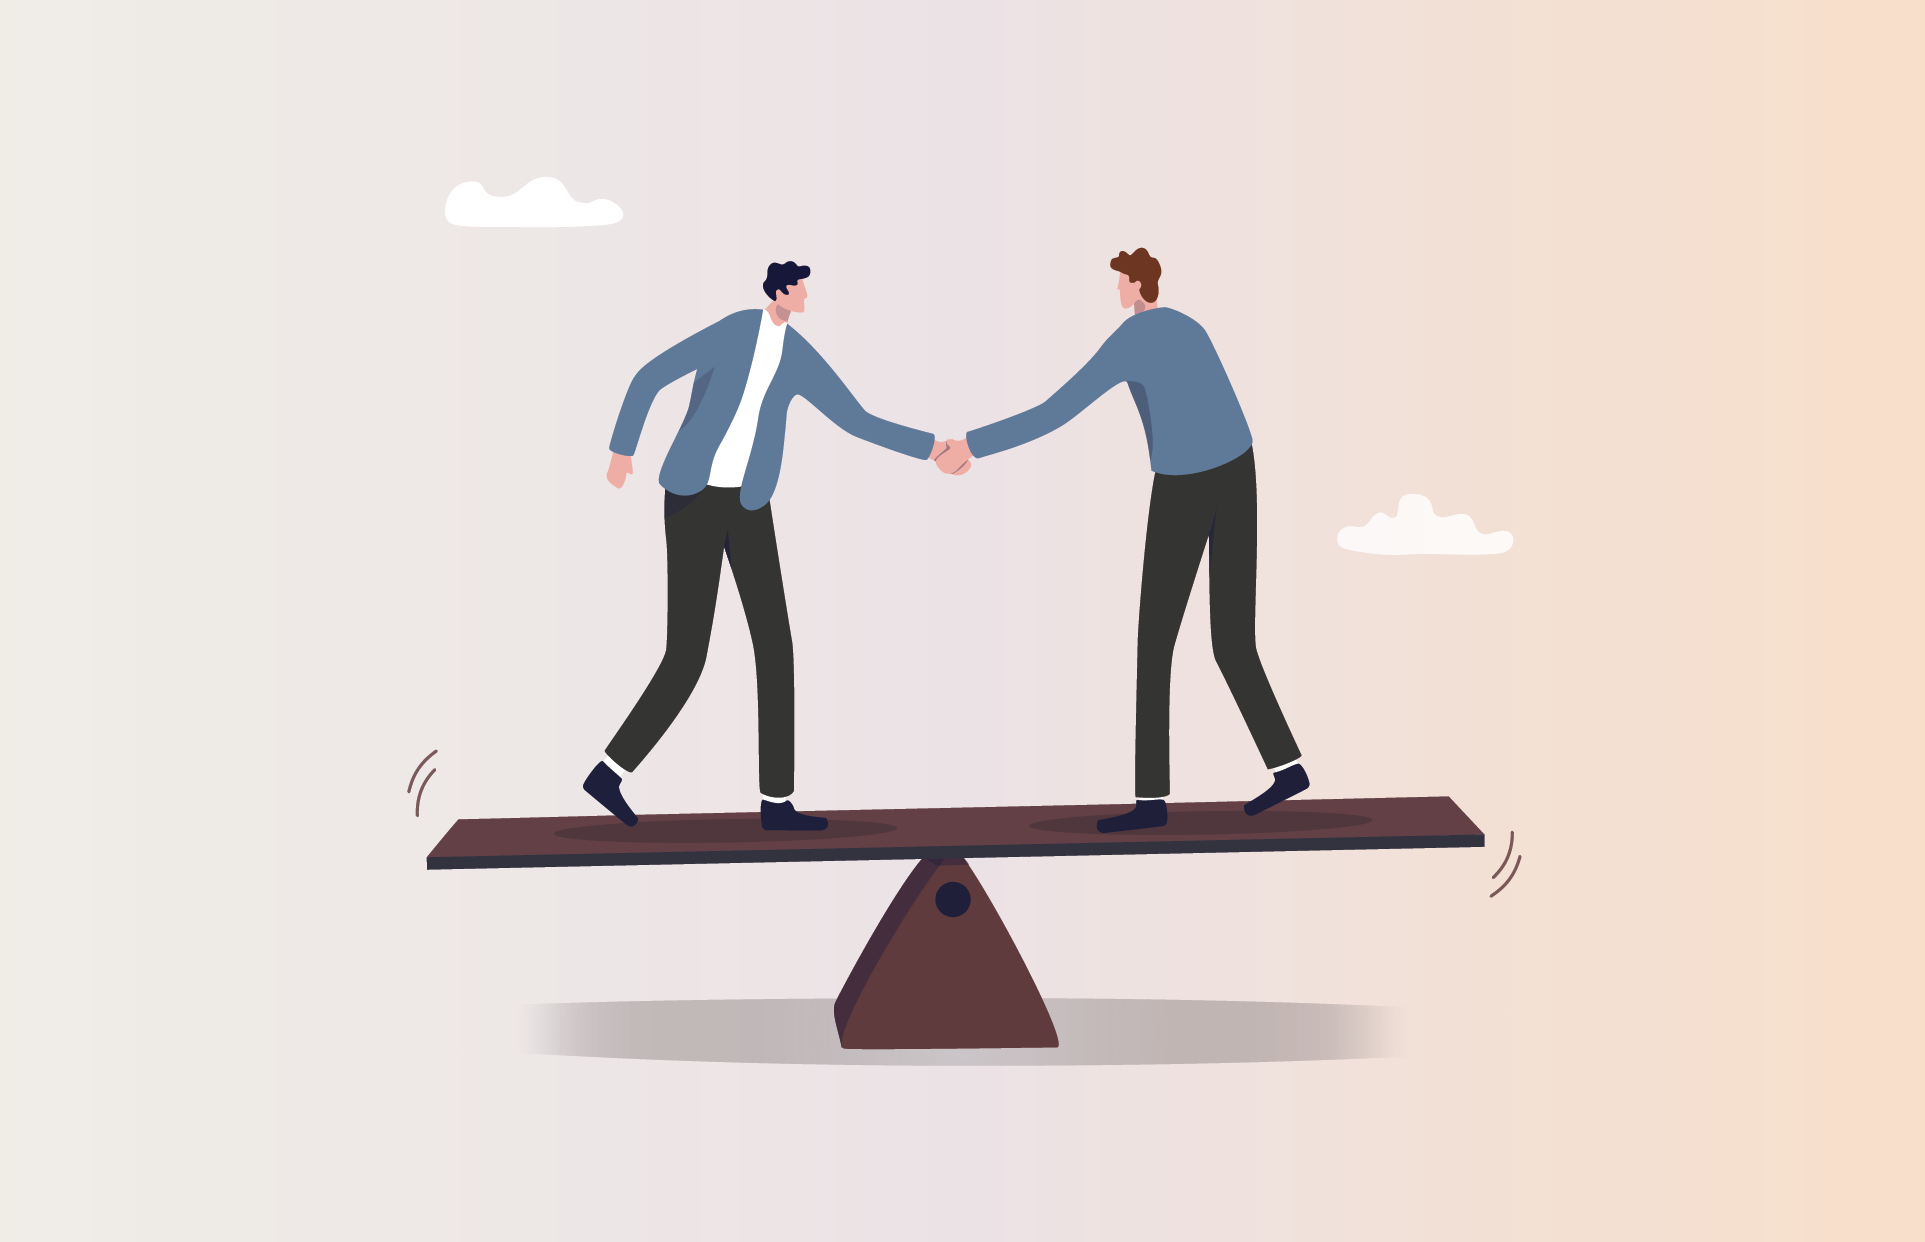 Illustrative graphic of two people standing on a teeter-totter shaking hands